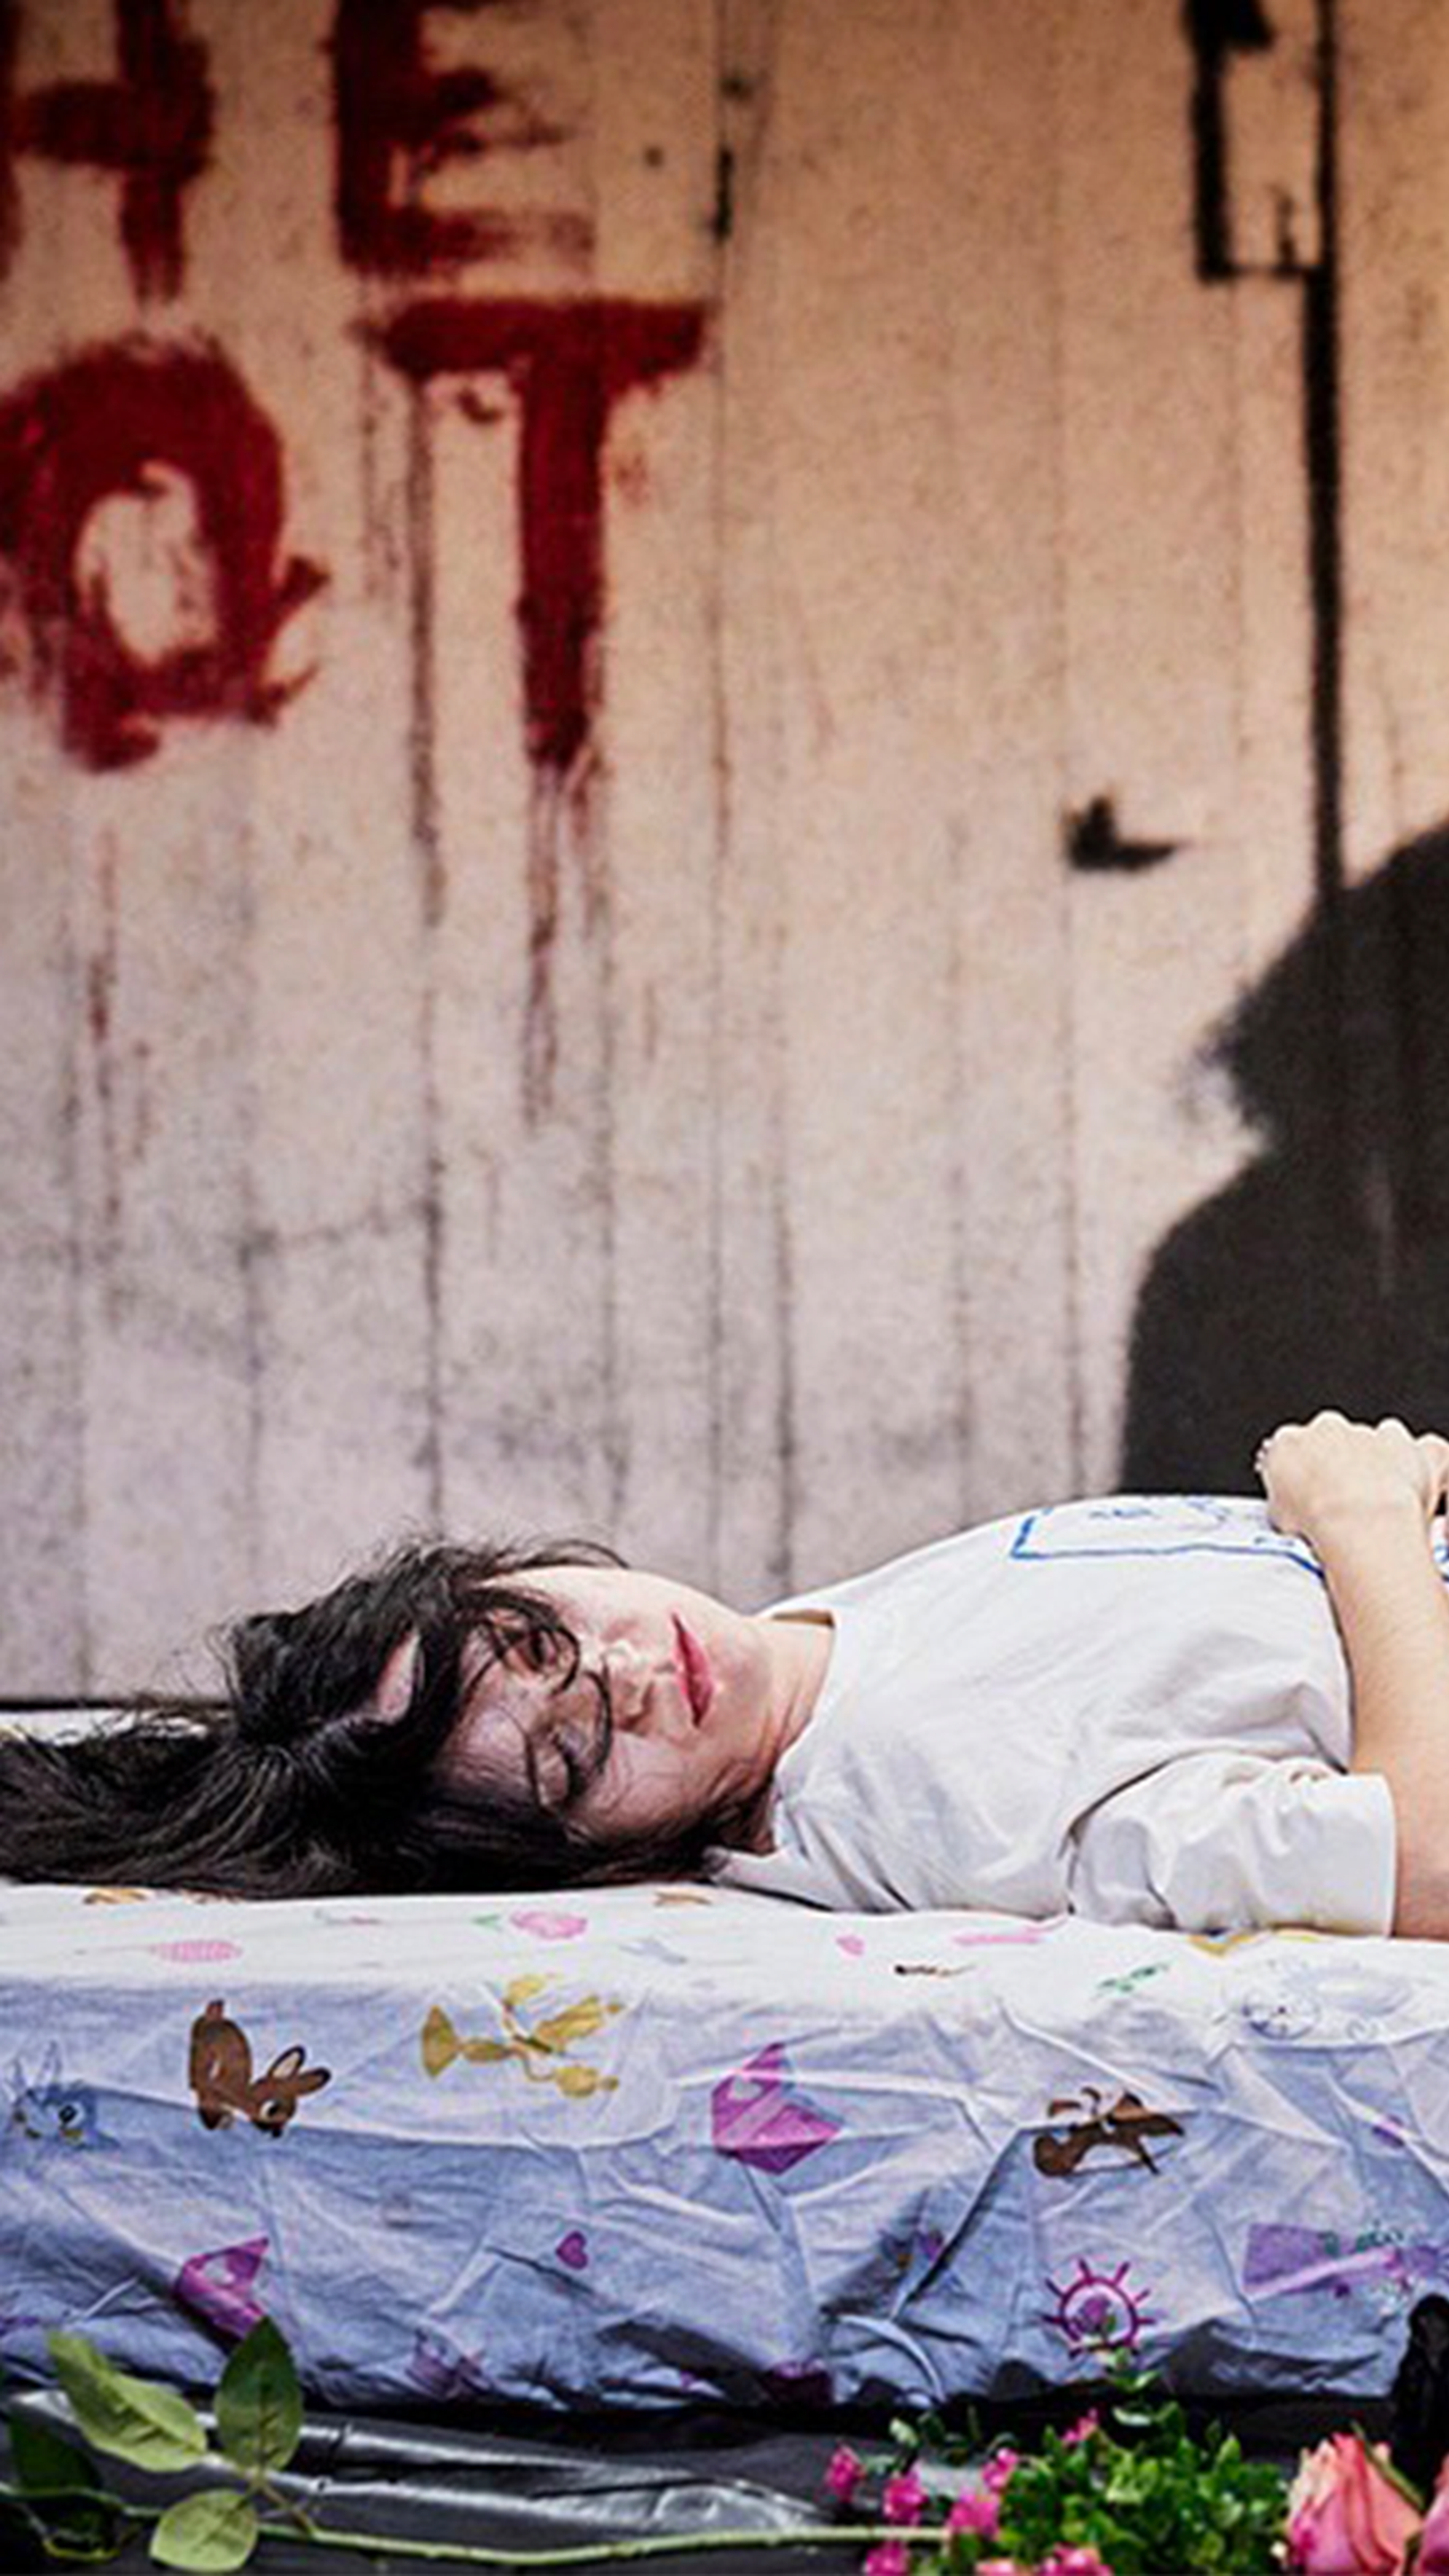 A woman lies sleeping on a mattress surrounded by roses. Her face turned to the camera. "She Got Love" is scrawled on the wall behind her in red paint.